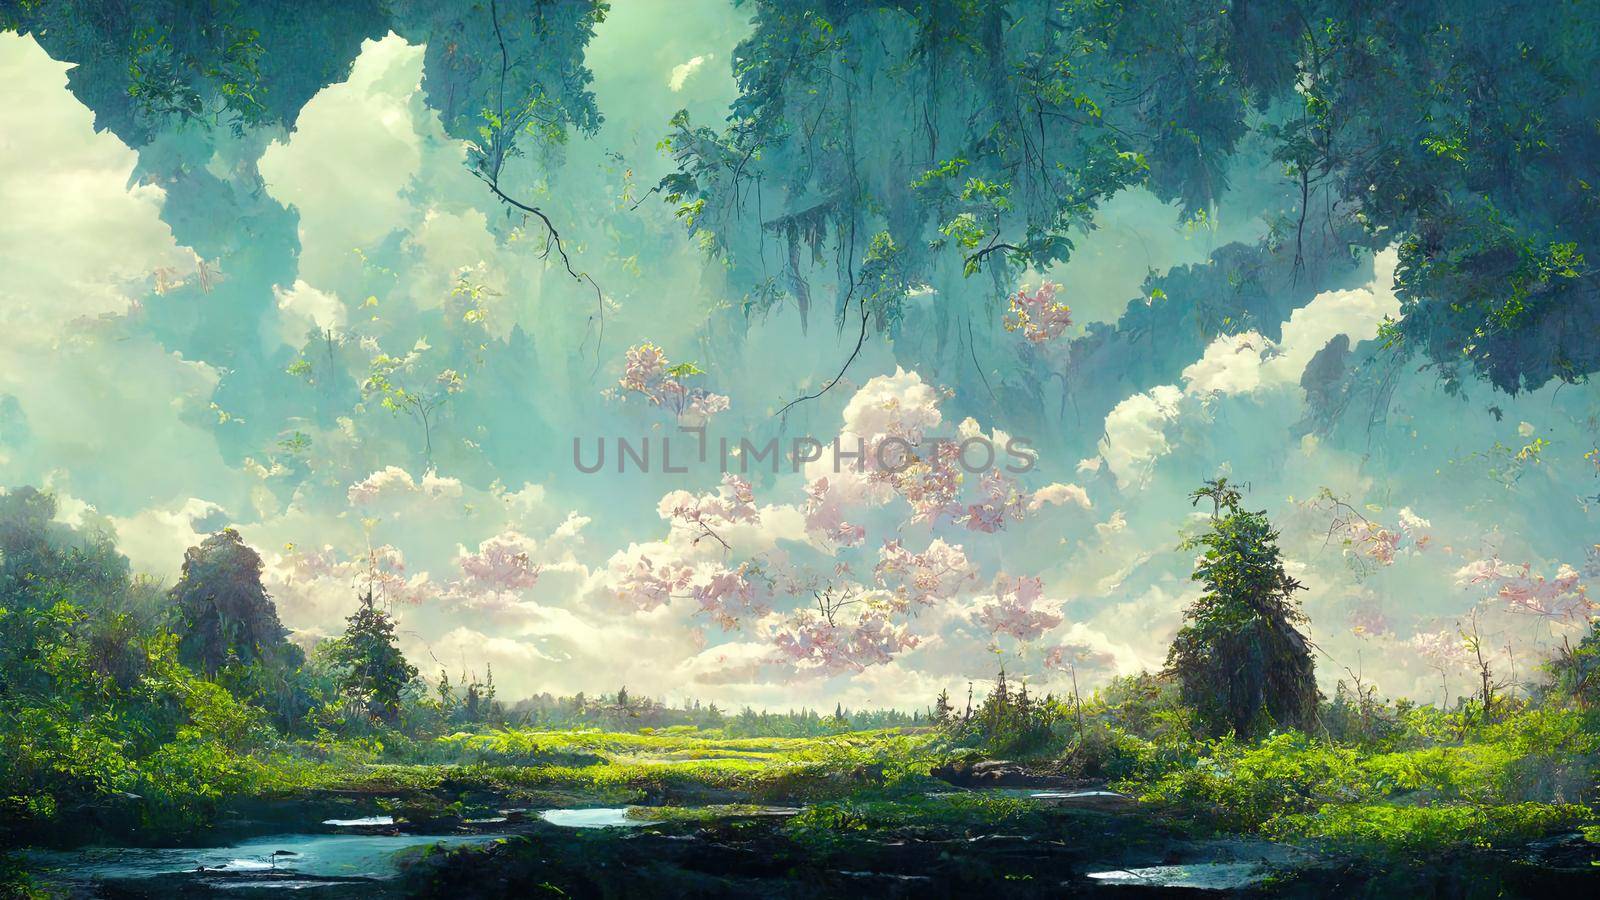 painted Anime Nature Environment. High quality illustration